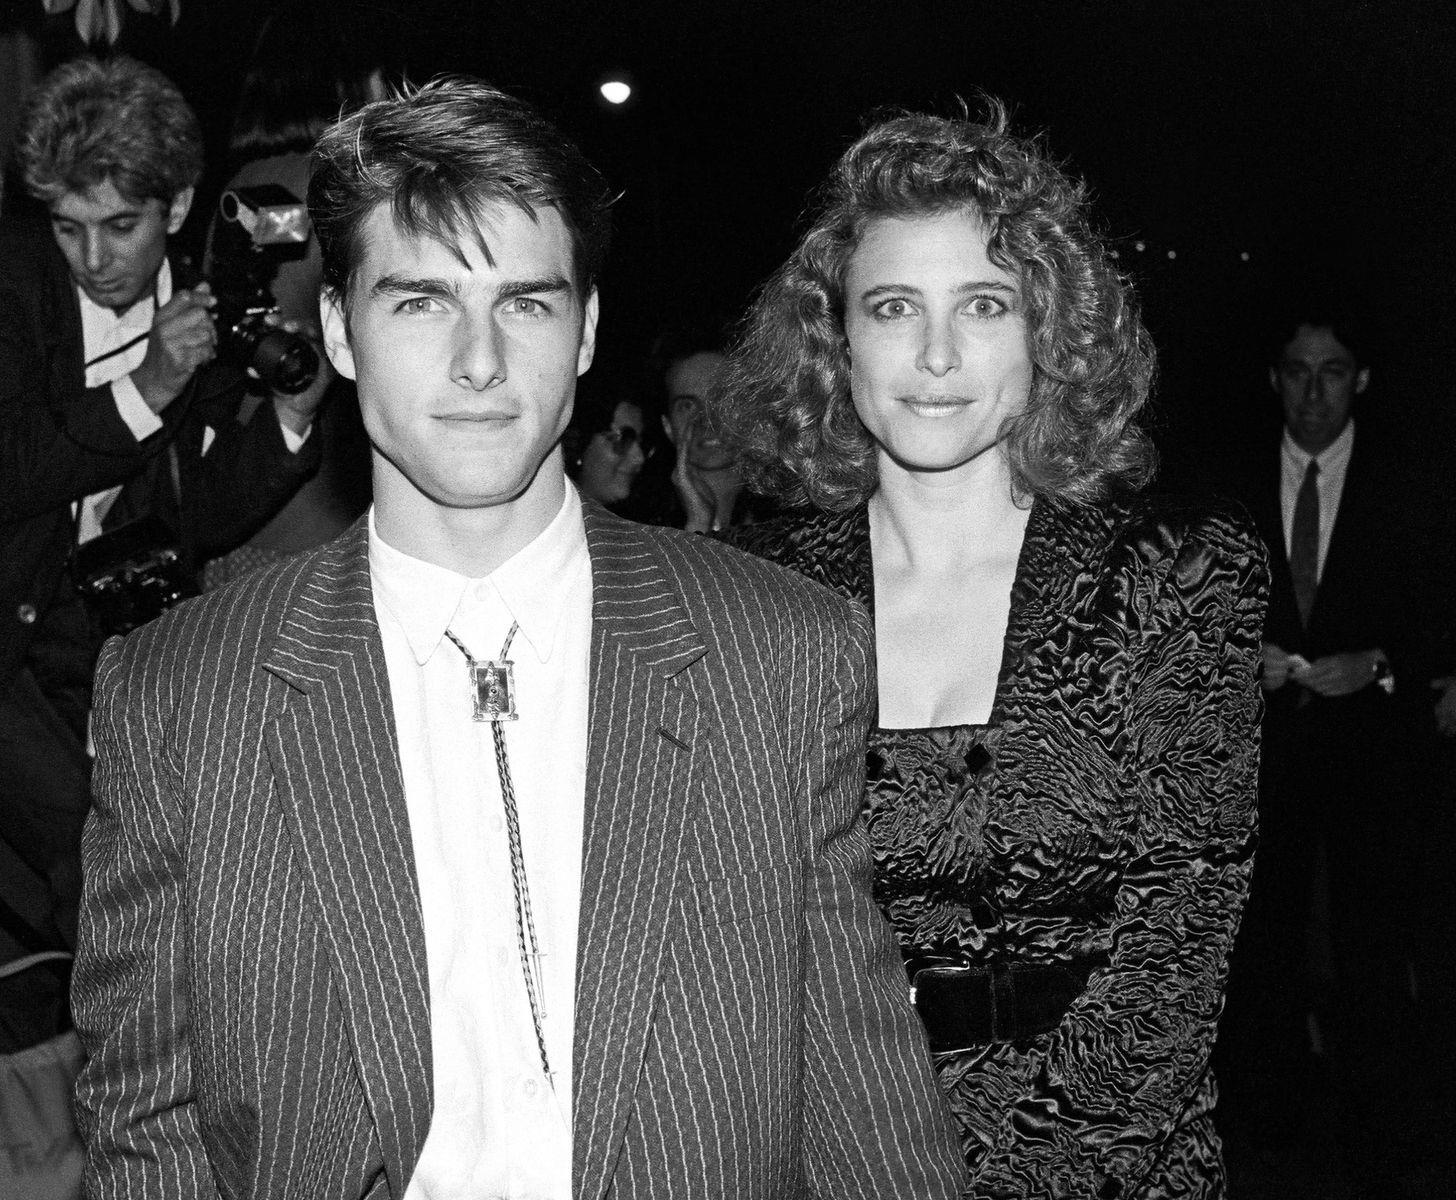 <p>The partnership would last three years. According to <a href="https://www.instyle.com/celebrity/tbt-tom-cruise-mimi-rogers-relationship" class="atom_link atom_valid">Andrew Morton’s unauthorized Tom Cruise biography</a>, the actors had this to say when they jointly announced their split: “While there have been positive aspects to our marriage, there were some issues which could not be resolved even after working on them for a period of time.”</p>